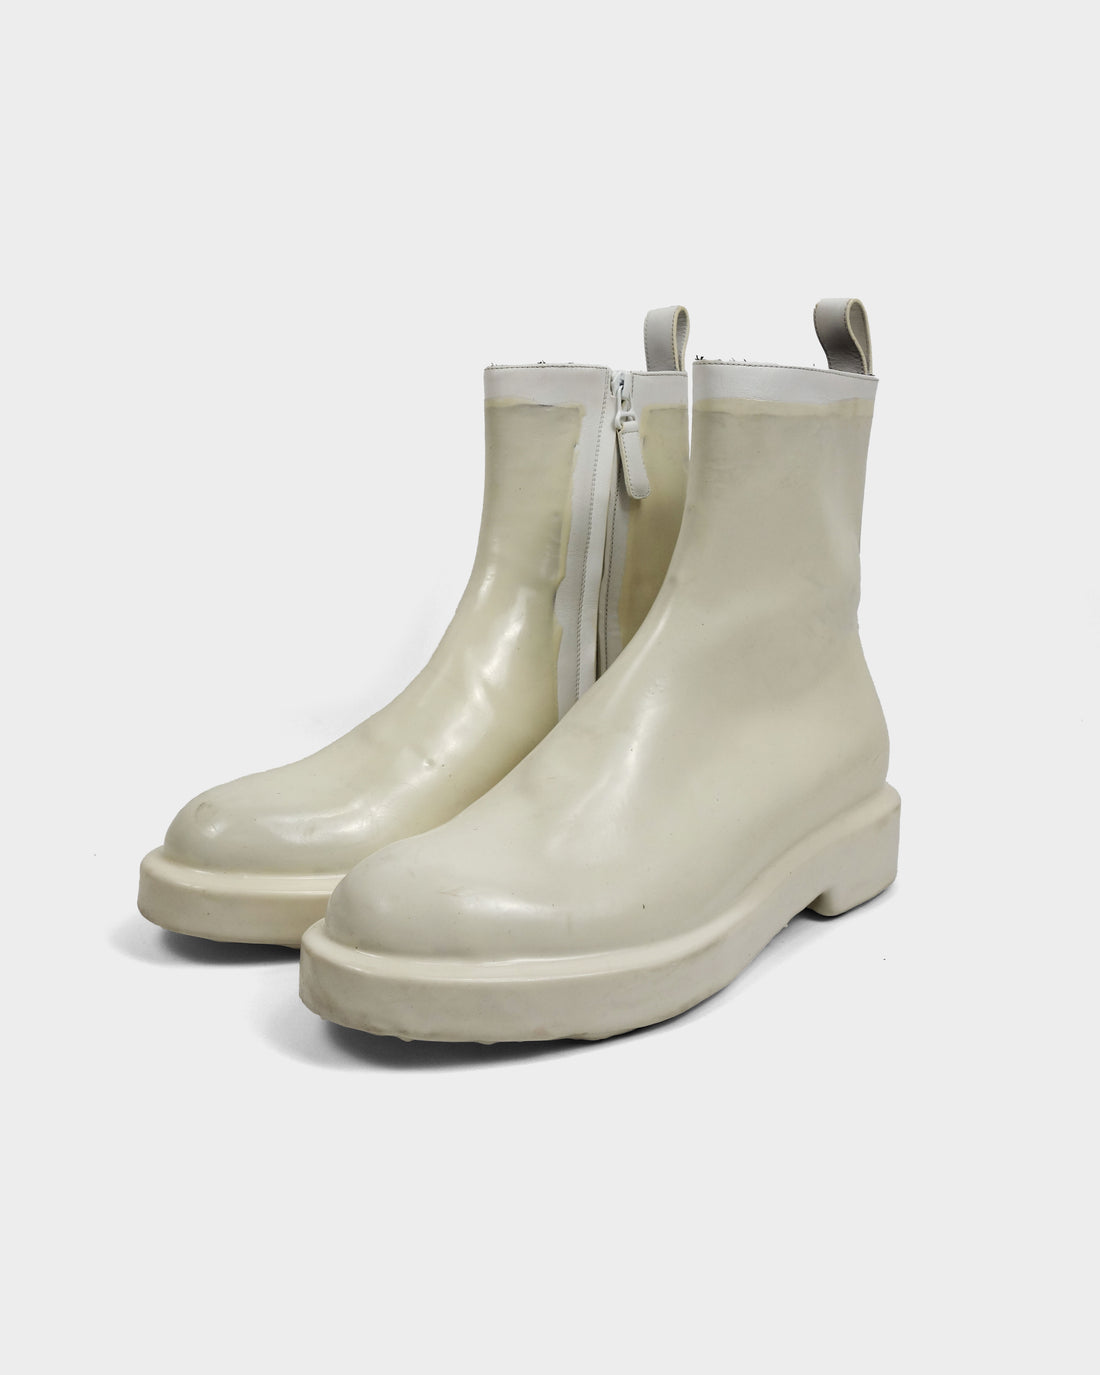 Balenciaga Dipped Side-Zip White Leather Boots AW 2016